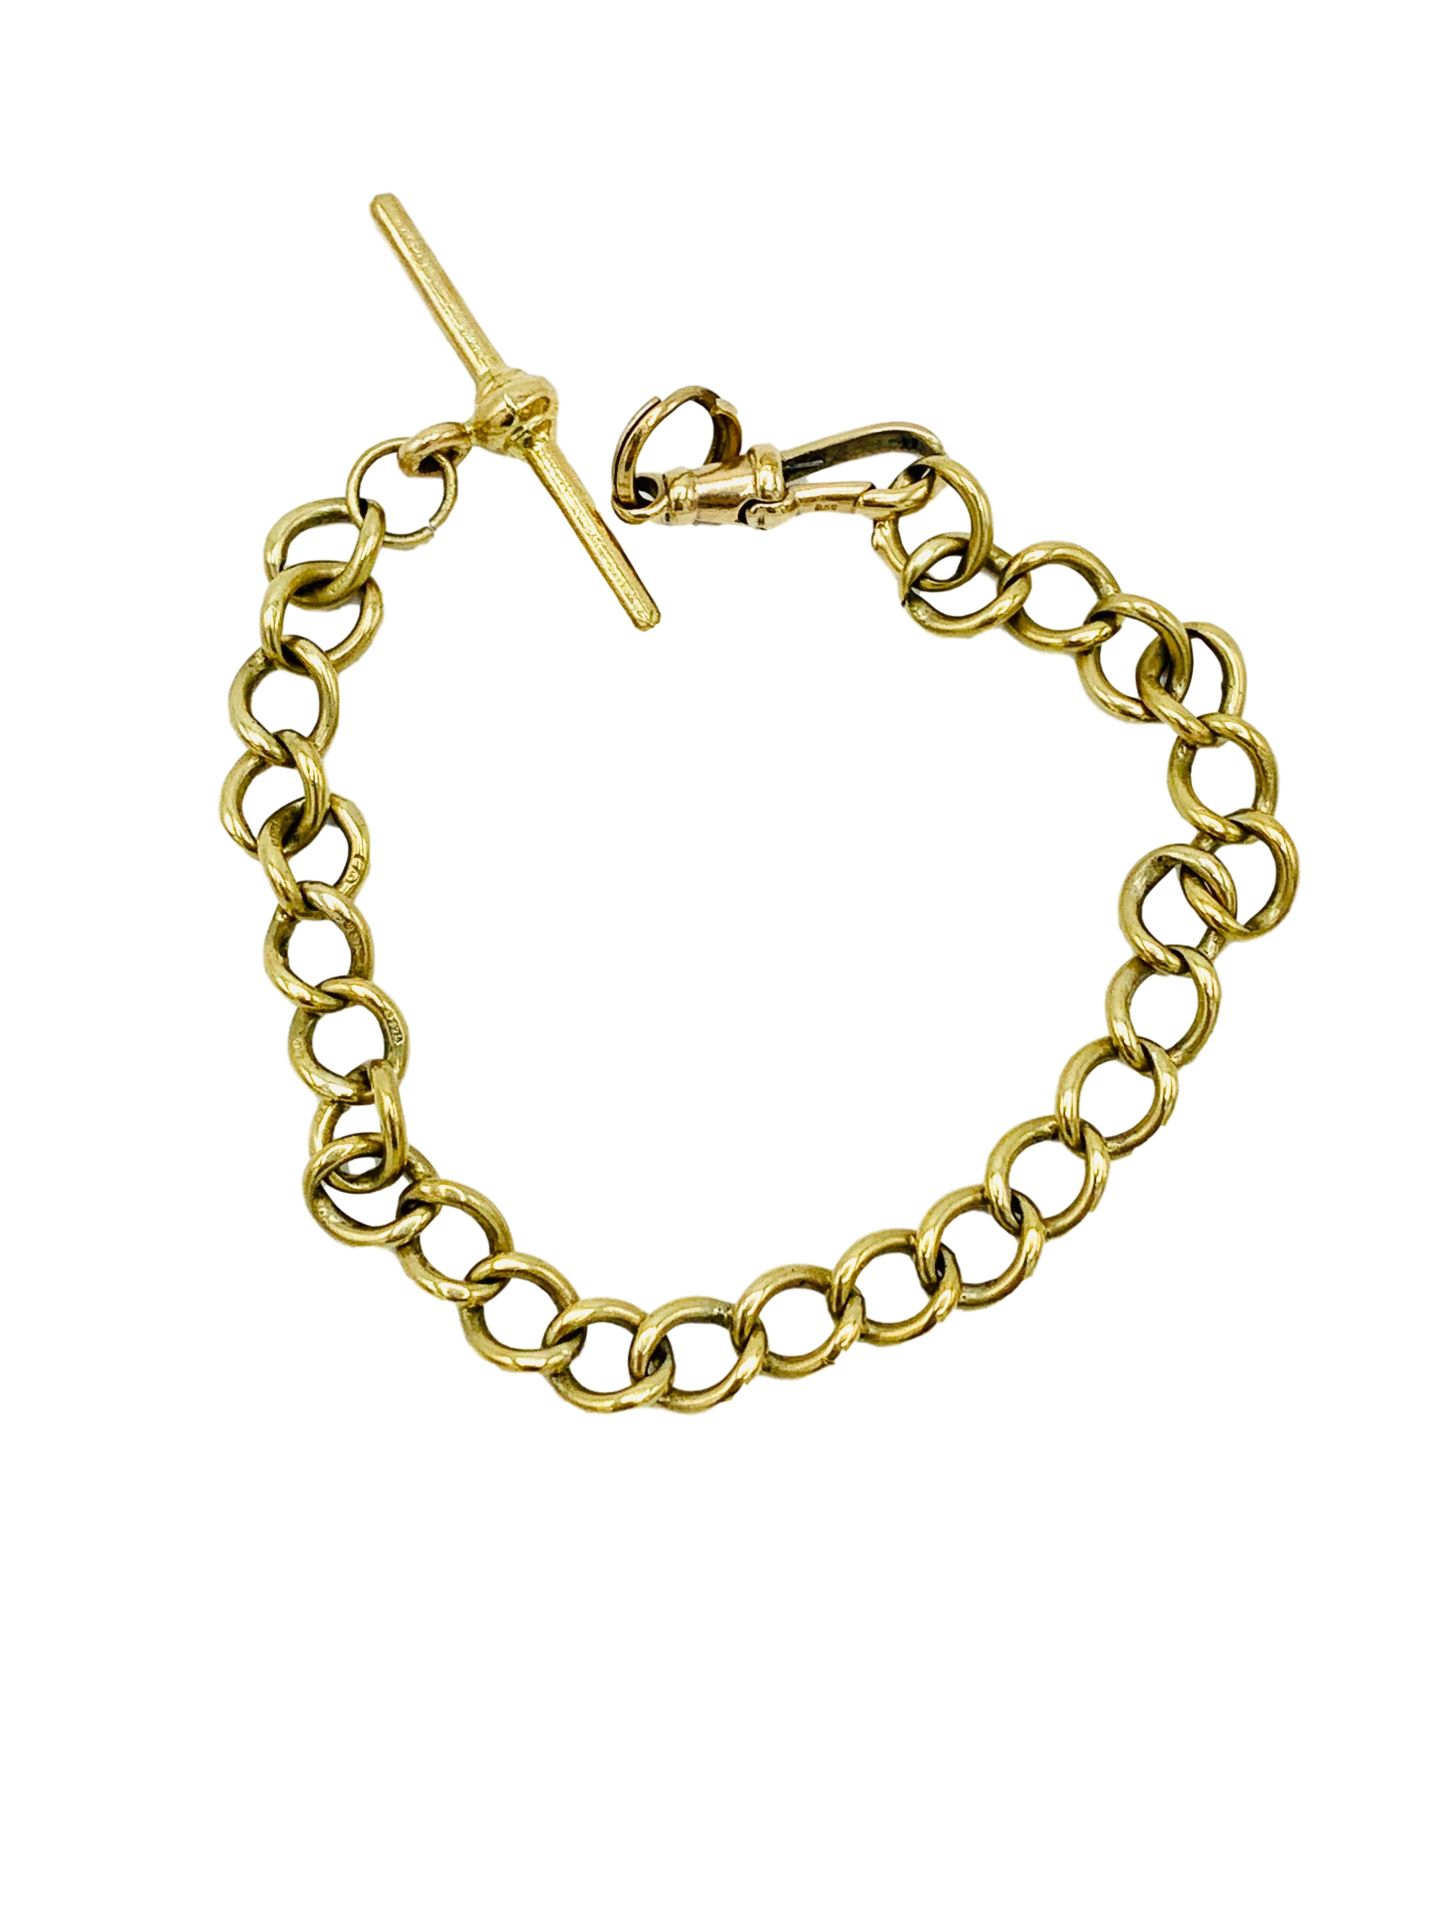 9ct gold fob chain. - Image 3 of 5